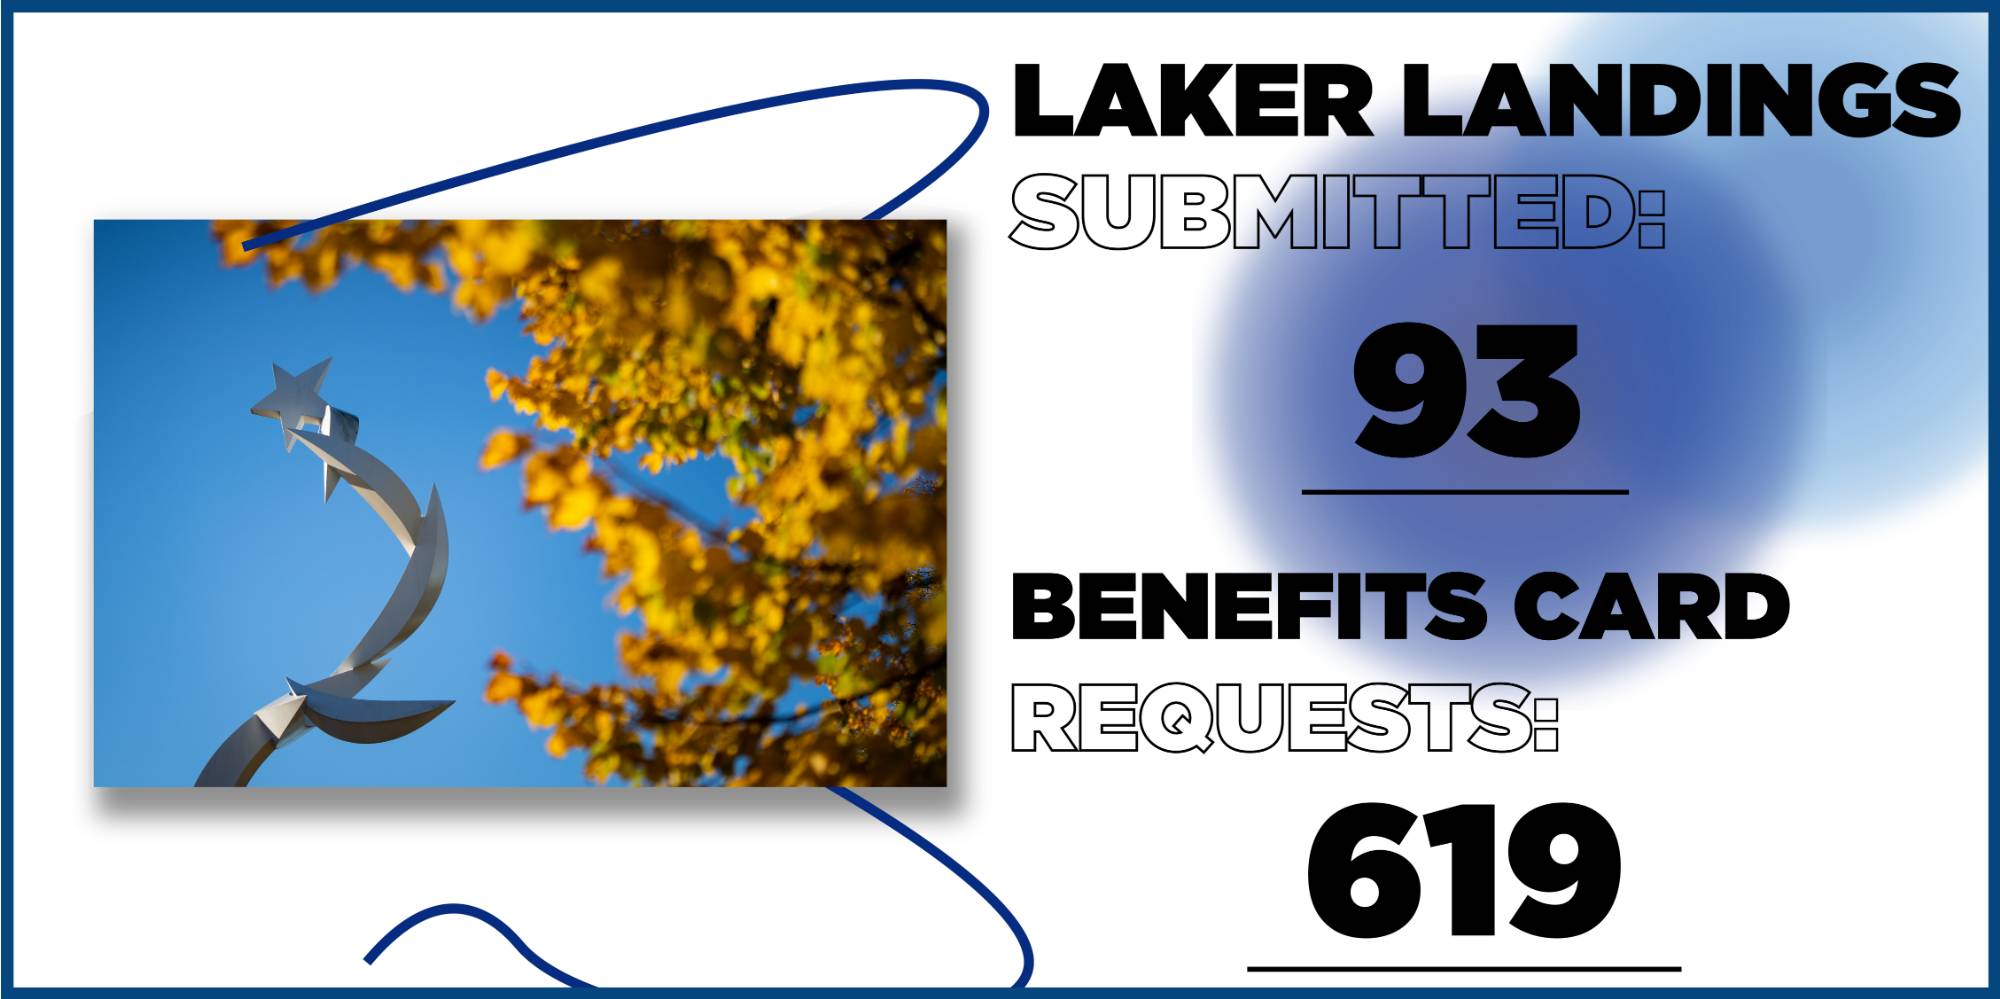 A total of 93 Laker Landings submitted were submitted in the past year, and 619 membership card requests. This data is displayed on the right side of an image of a sculpture on the Allendale campus.